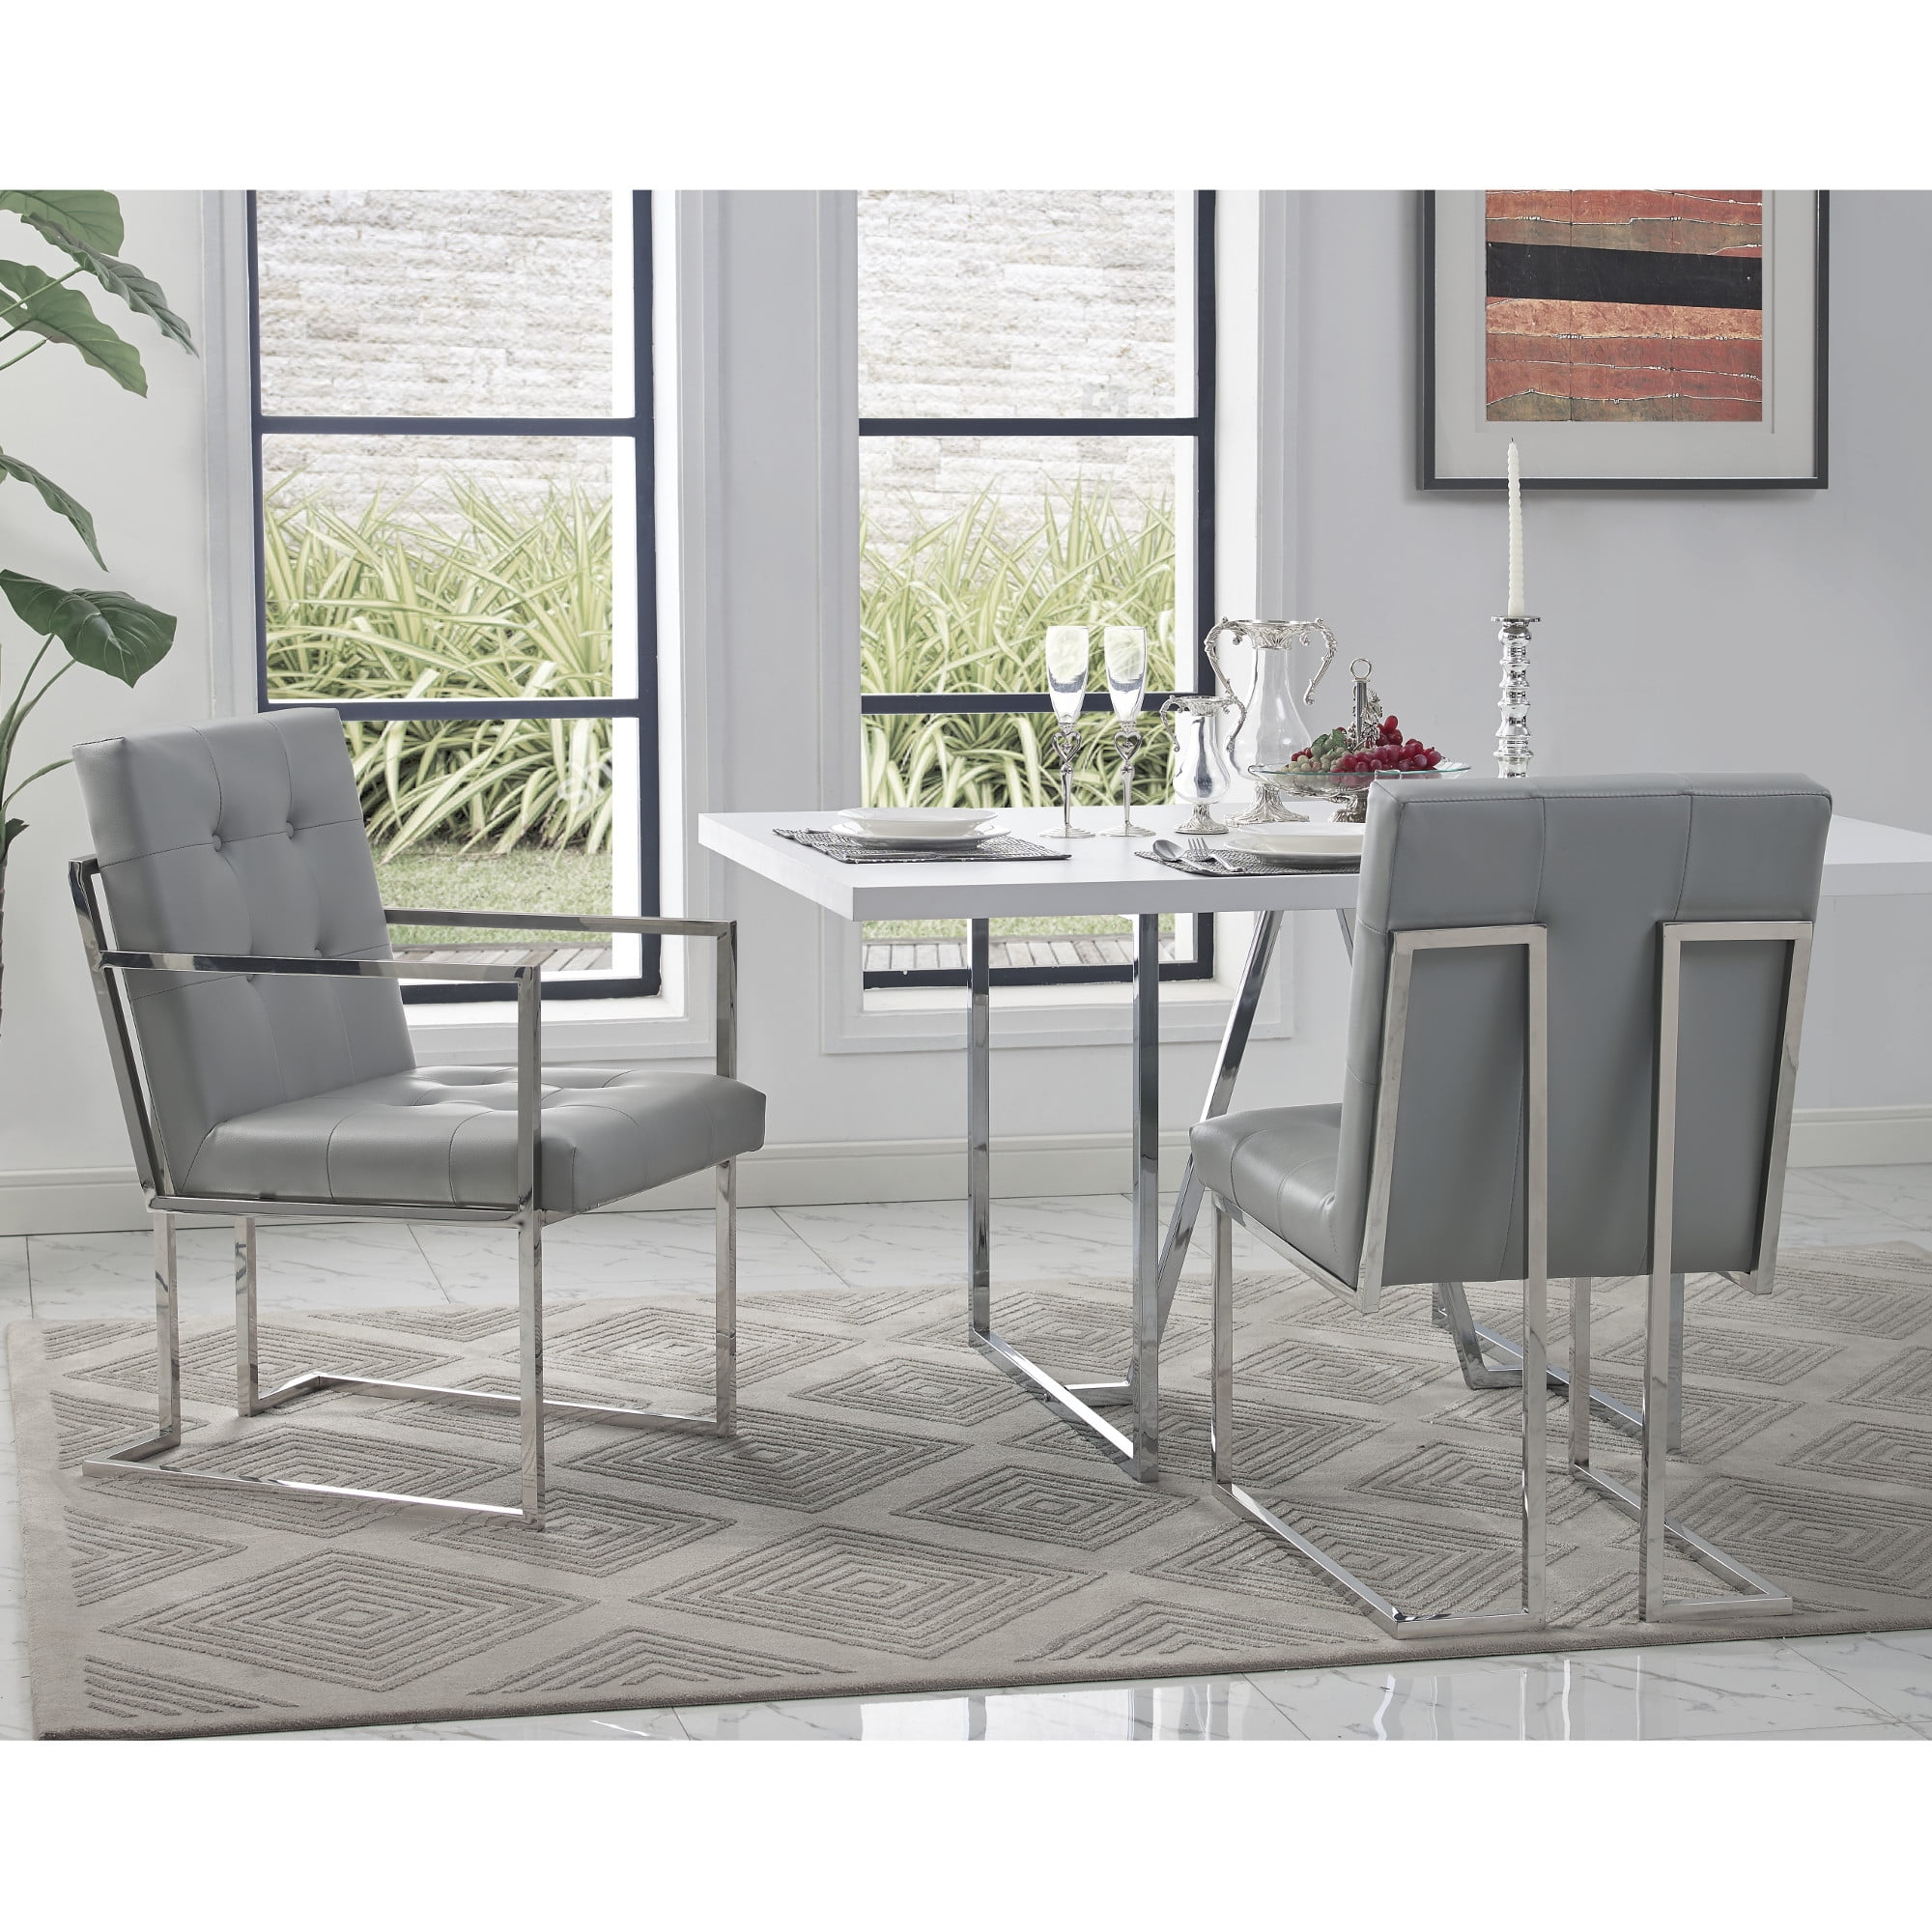 Pu Leather Dining Chairs On Tufted, Leather Upholstered Dining Chairs With Arms